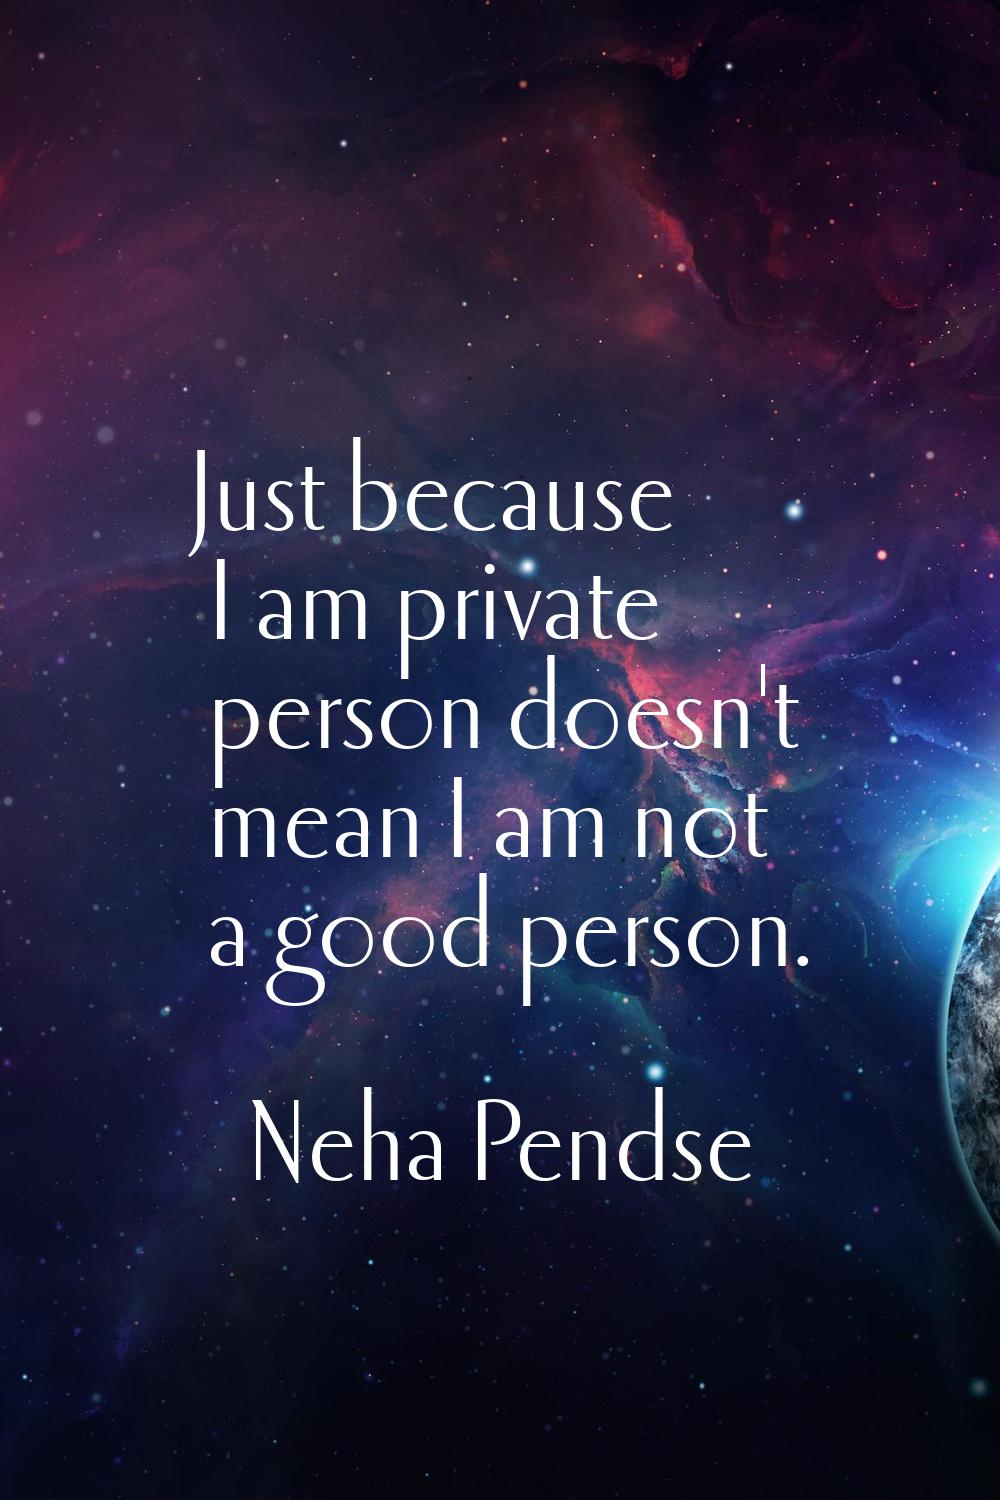 Just because I am private person doesn't mean I am not a good person.